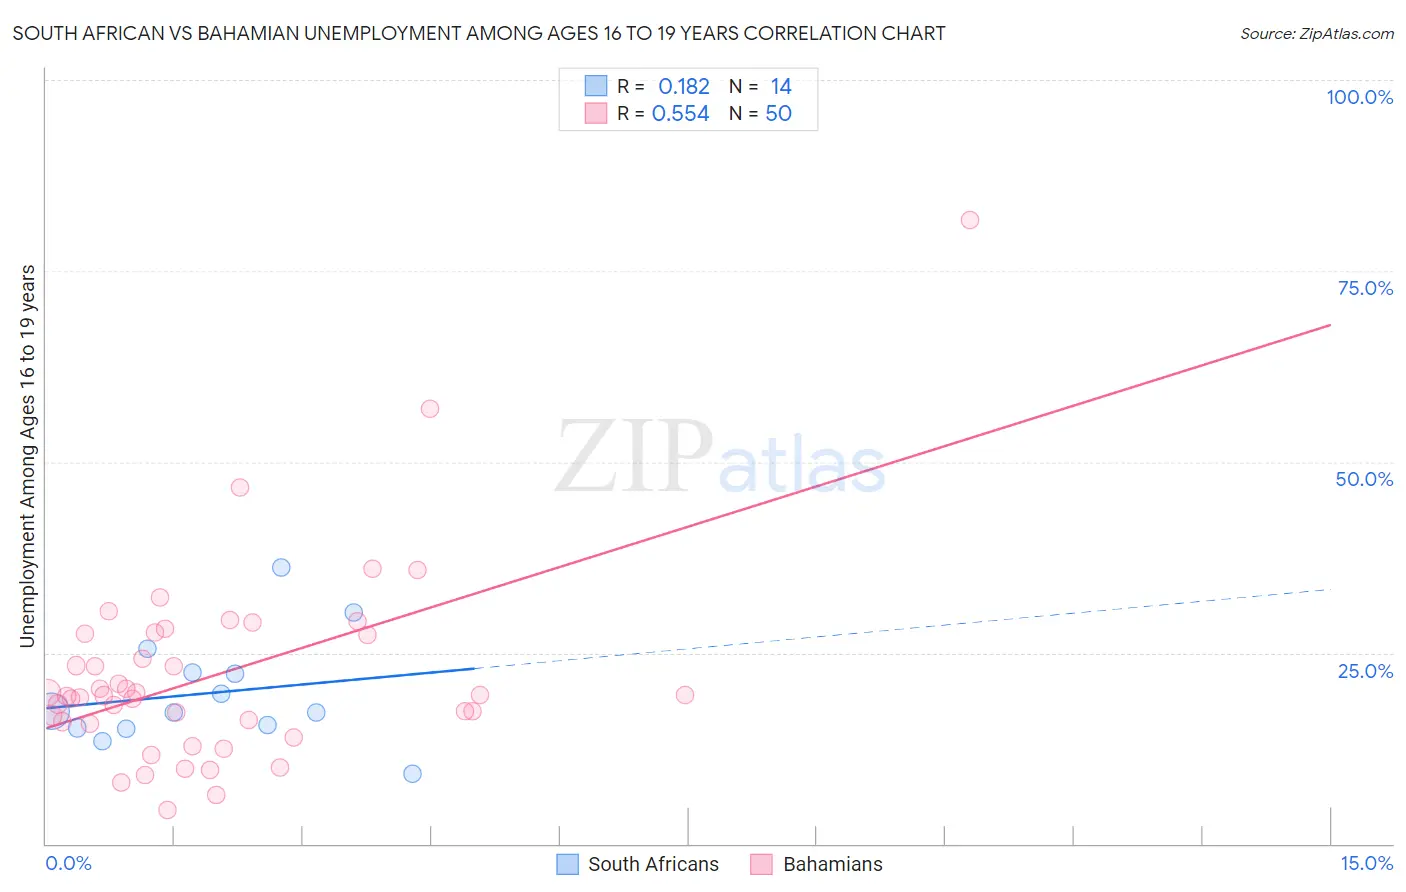 South African vs Bahamian Unemployment Among Ages 16 to 19 years